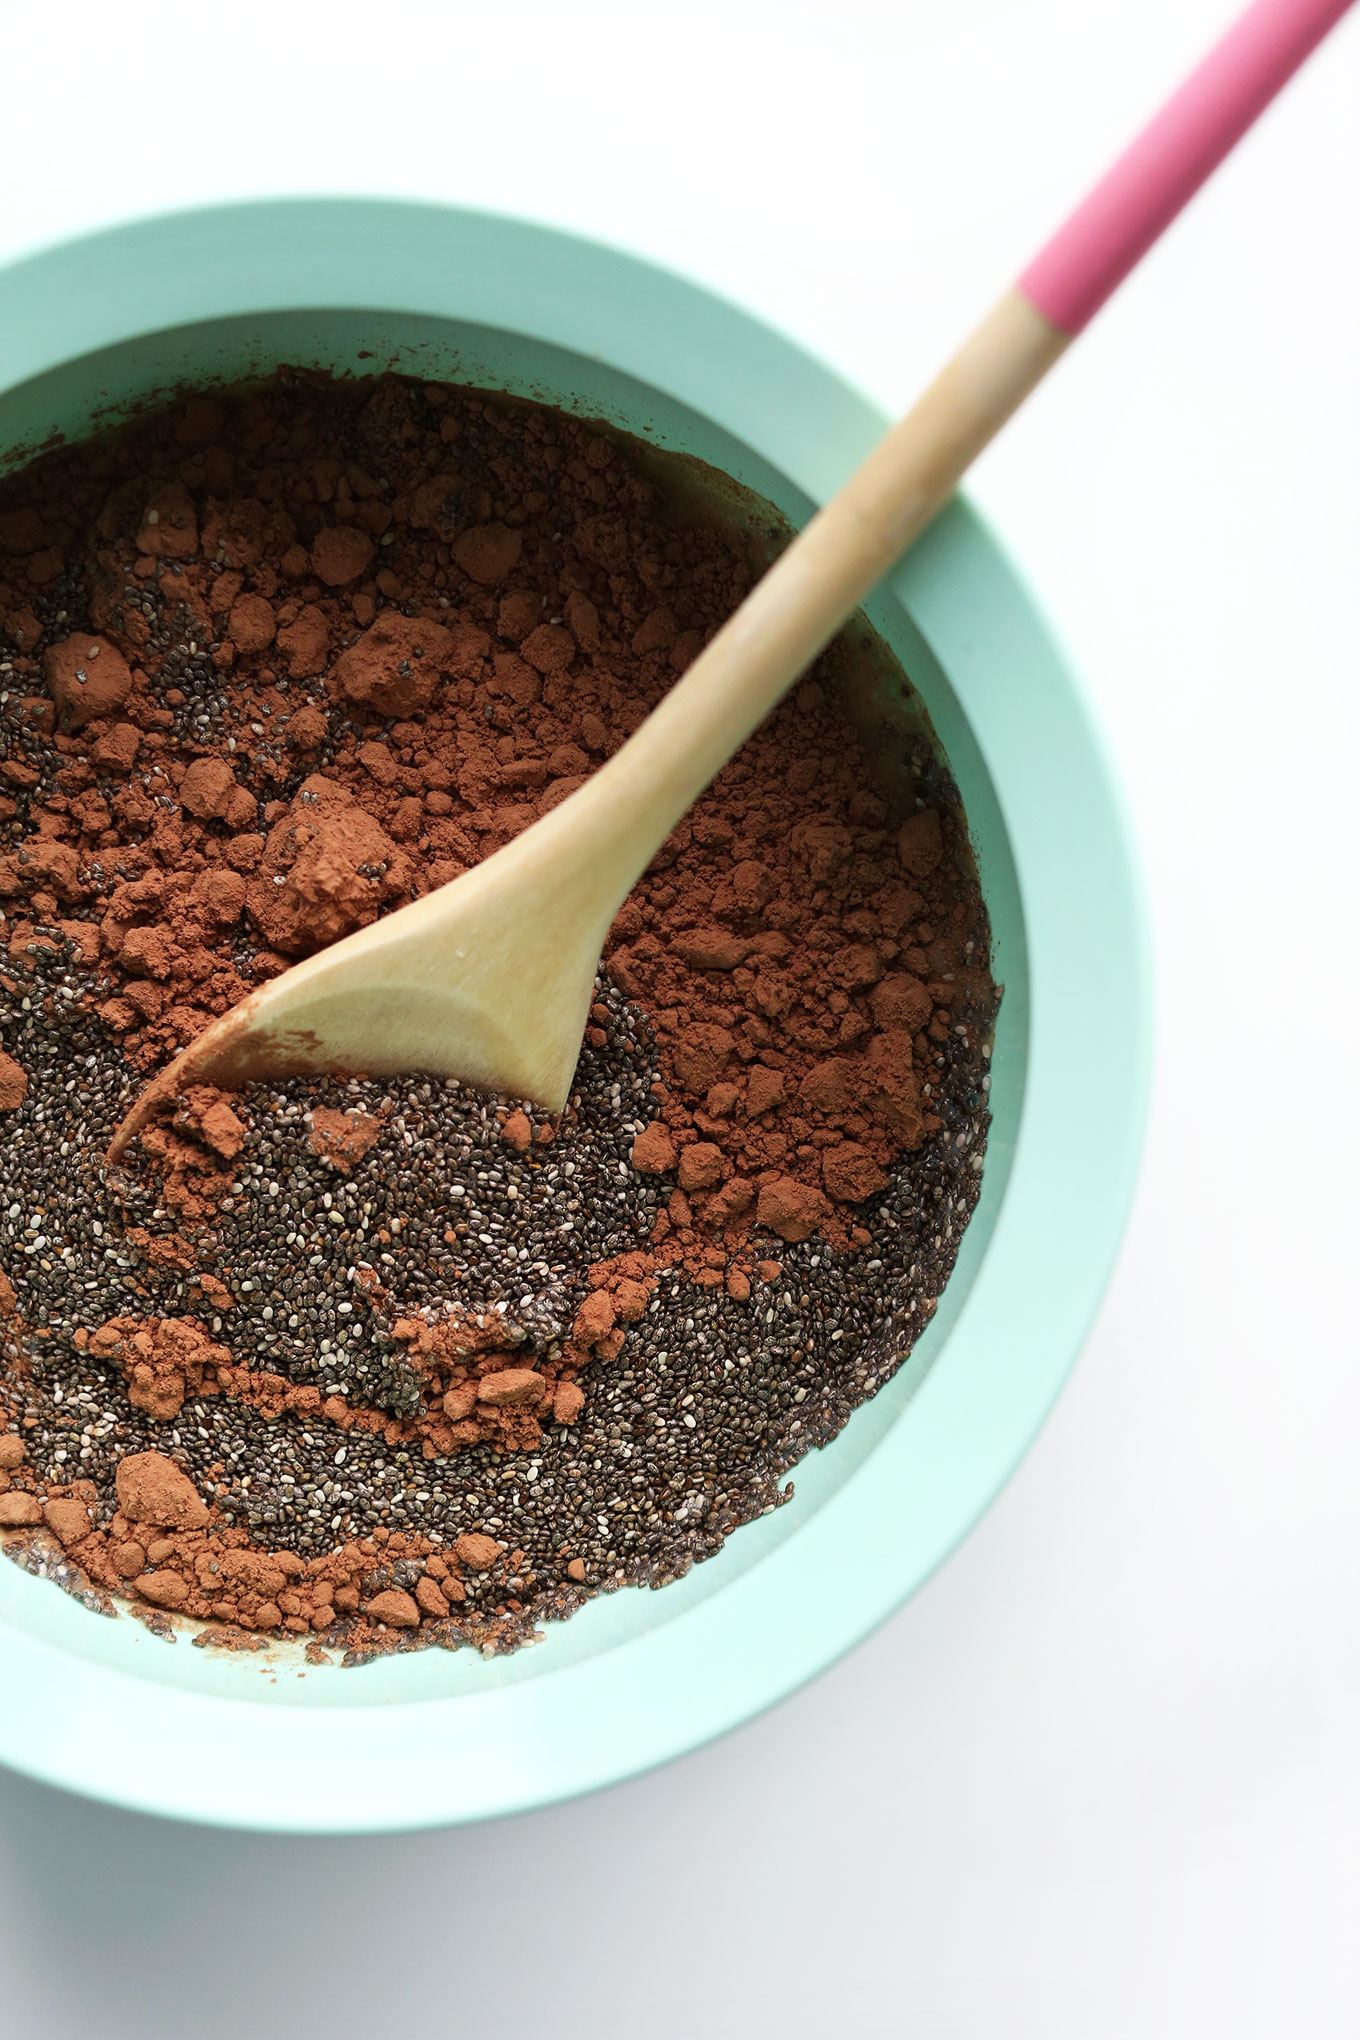 Stirring together a batch of our delicious Chocolate Chia Seed Pudding recipe